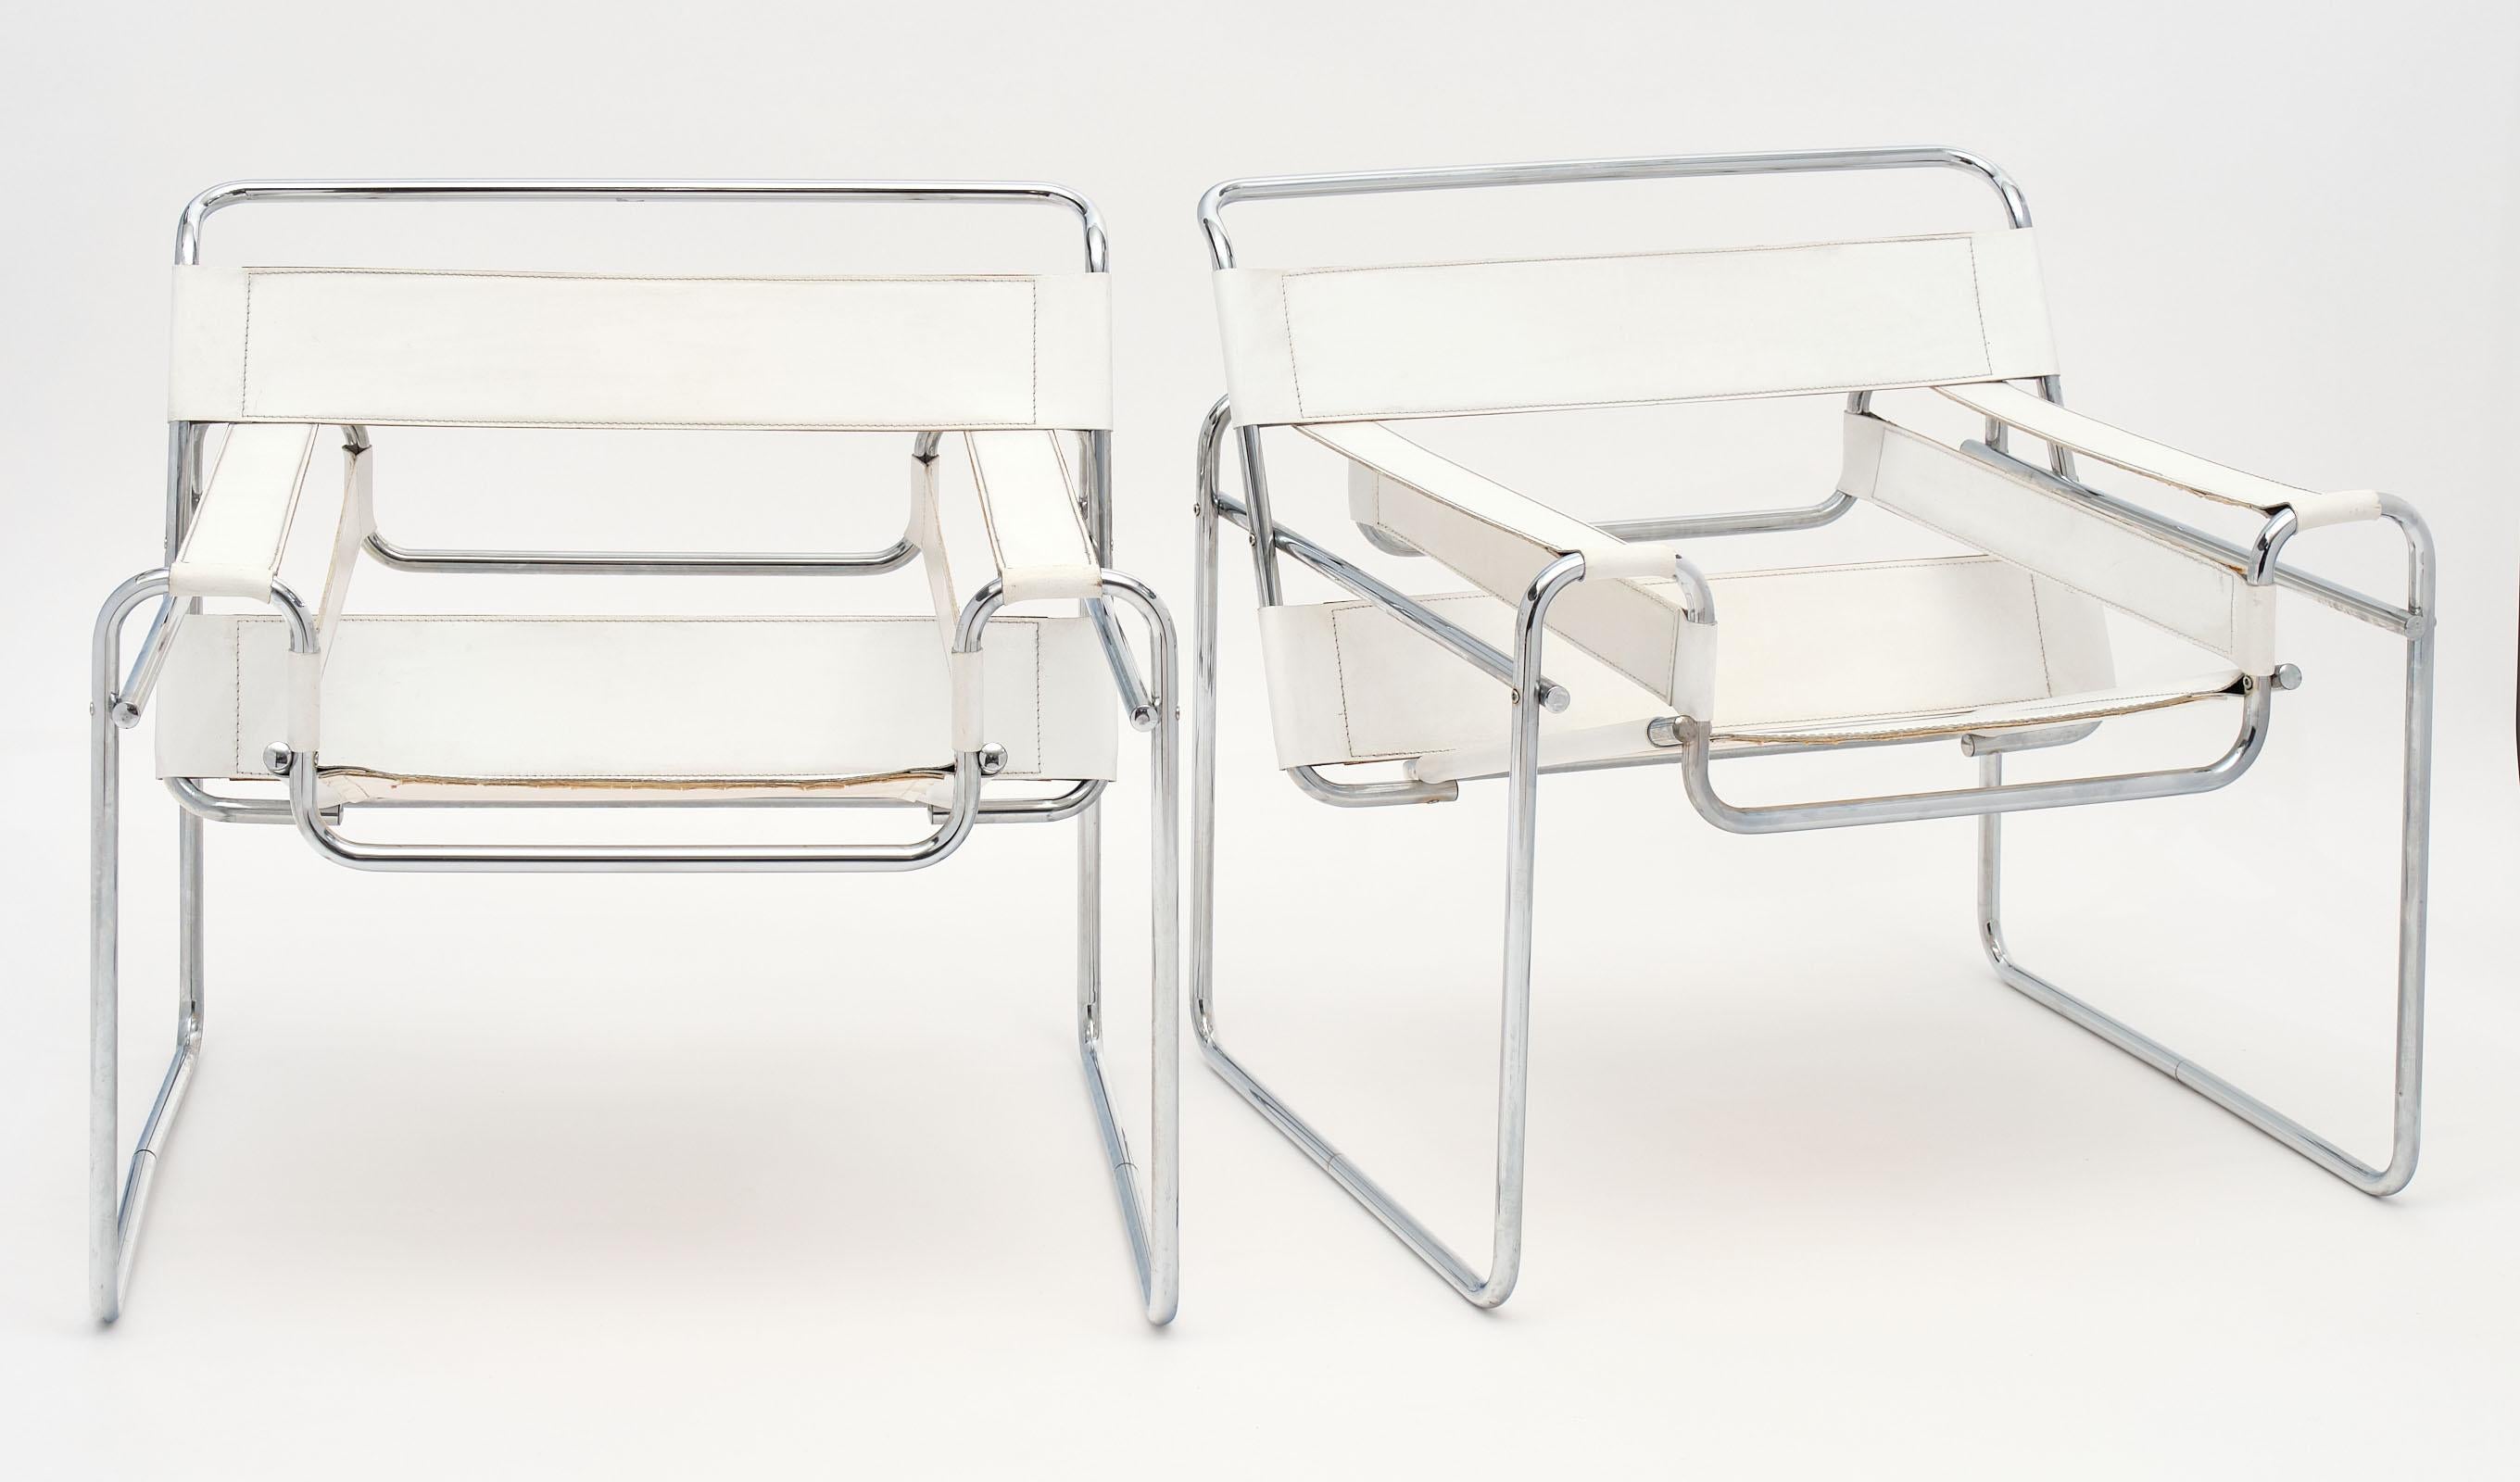 Pair of armchairs in the manner of Marcel Breuer’s Wassily design. These chairs are made of white leather and chromed steel in the iconic chair design by Breuer.